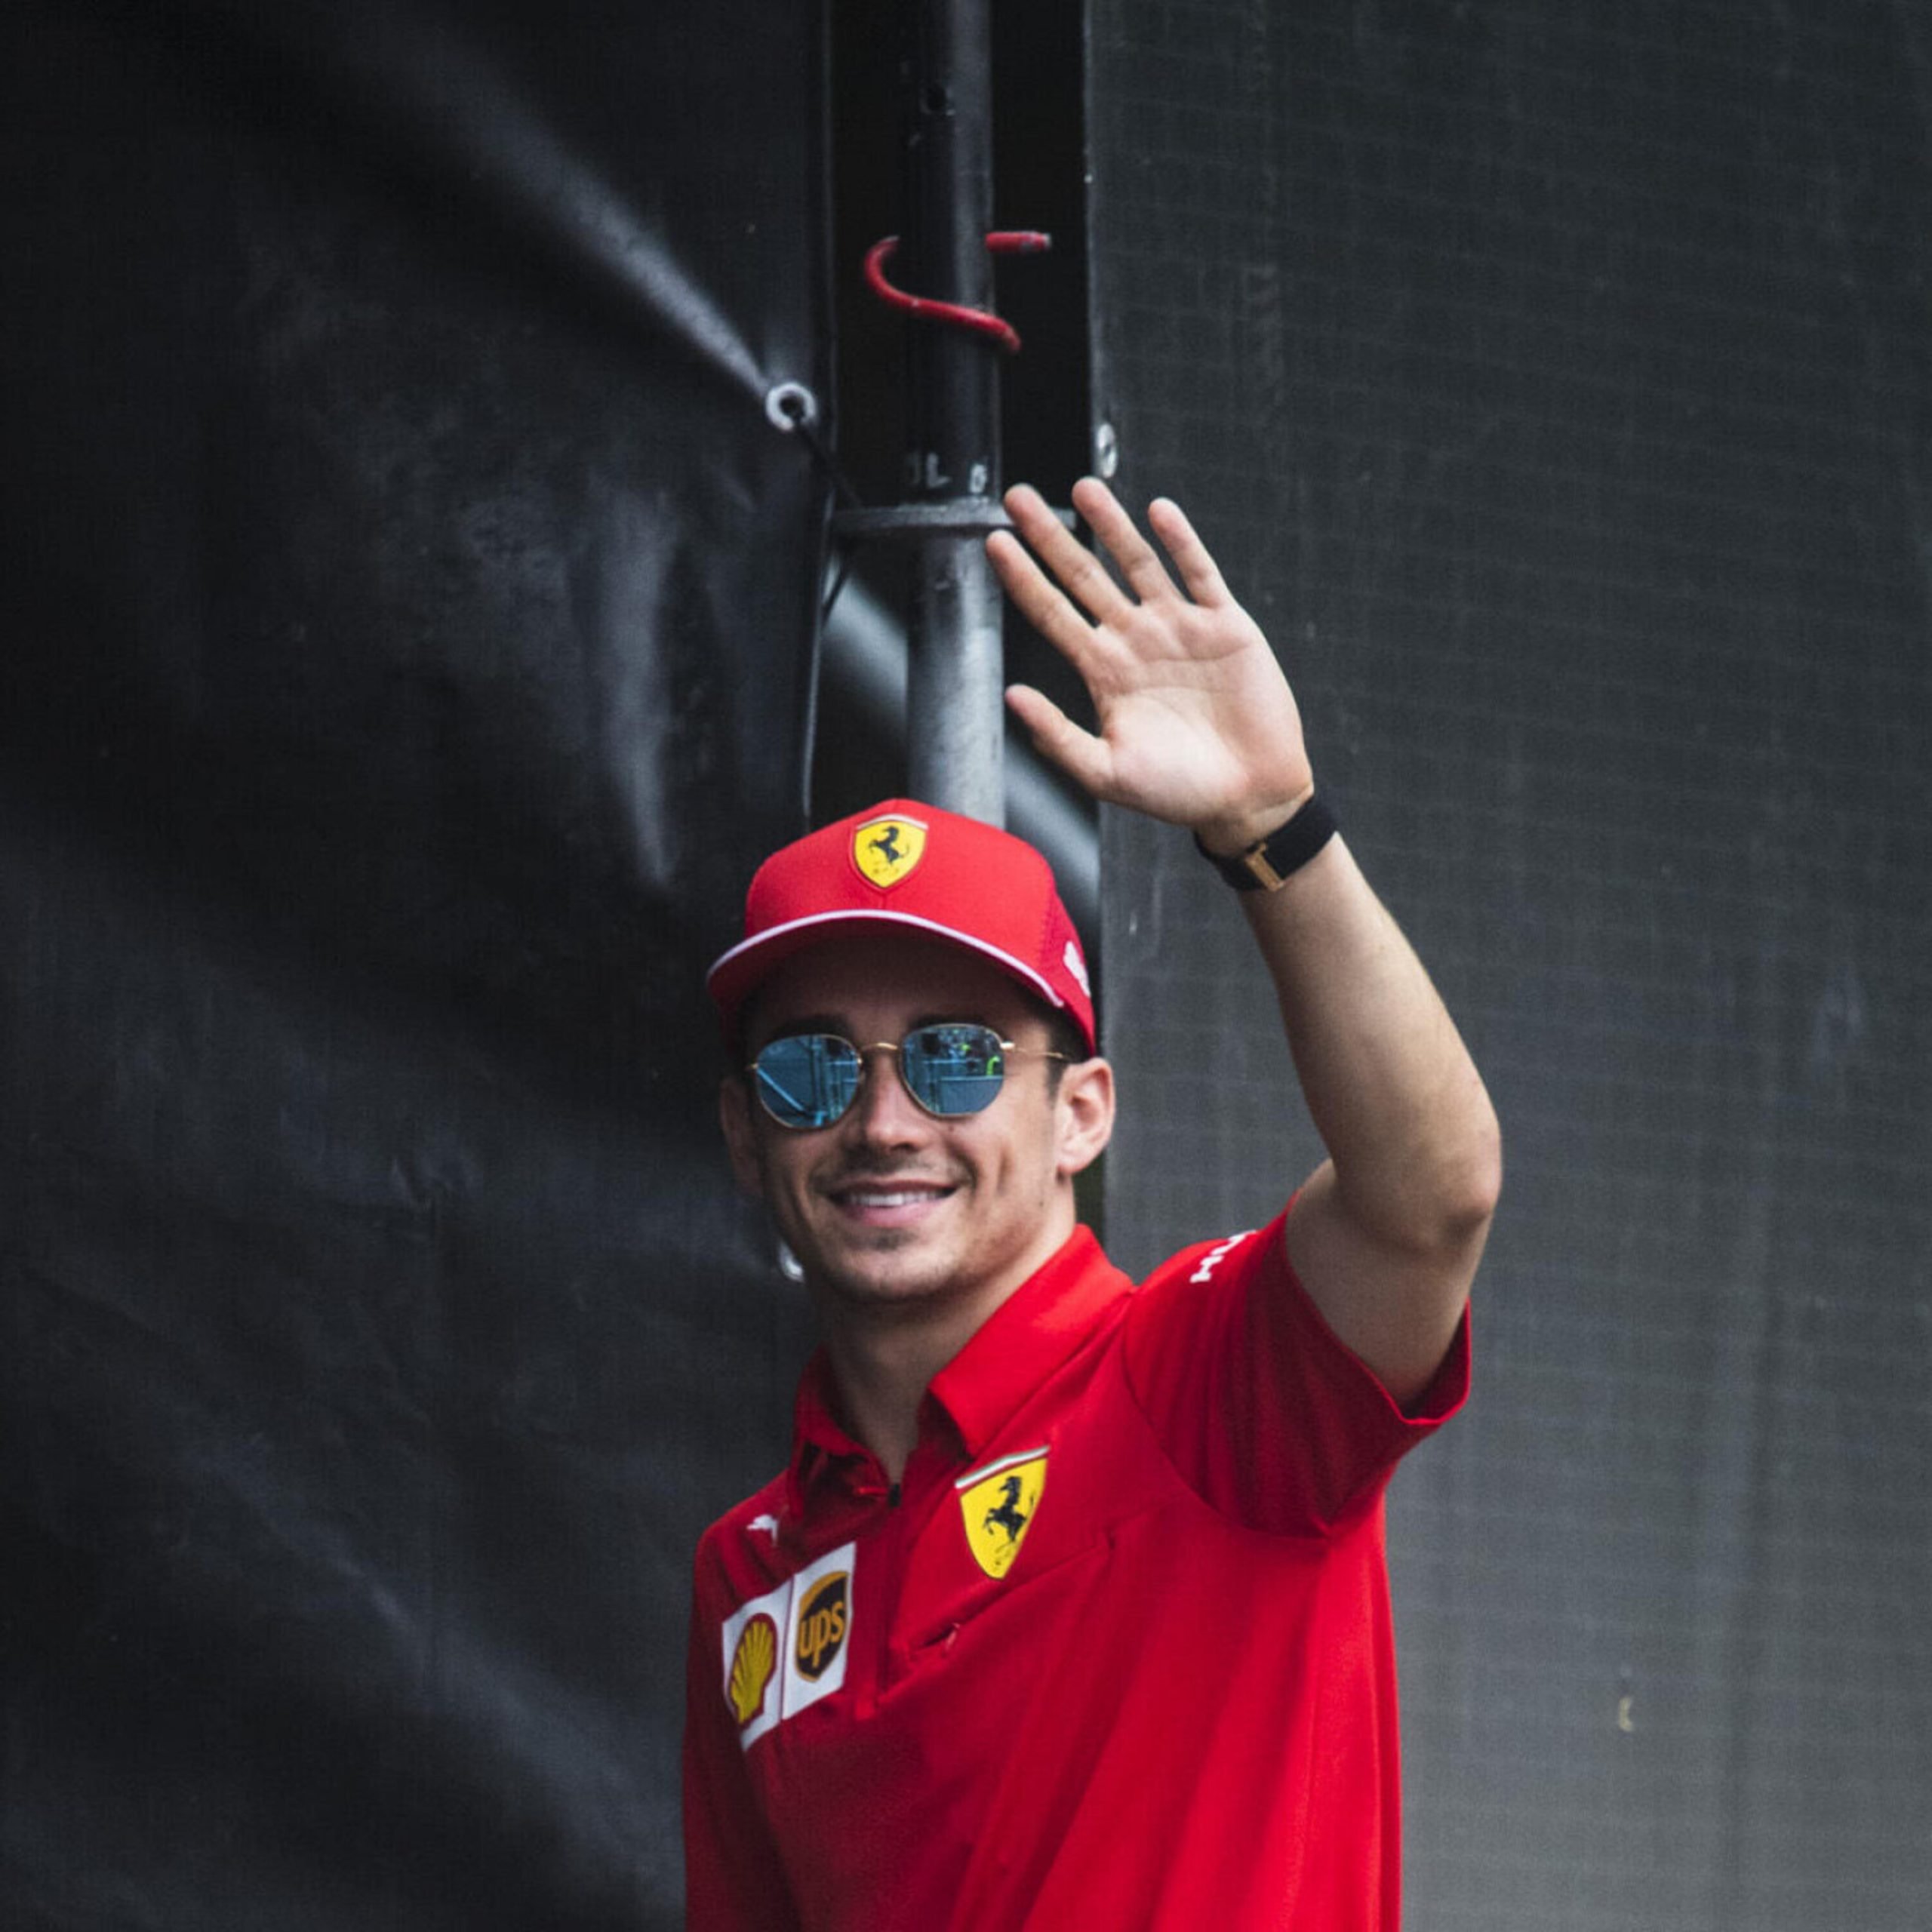 34: Will Leclerc Be Rosberg's Next Target?